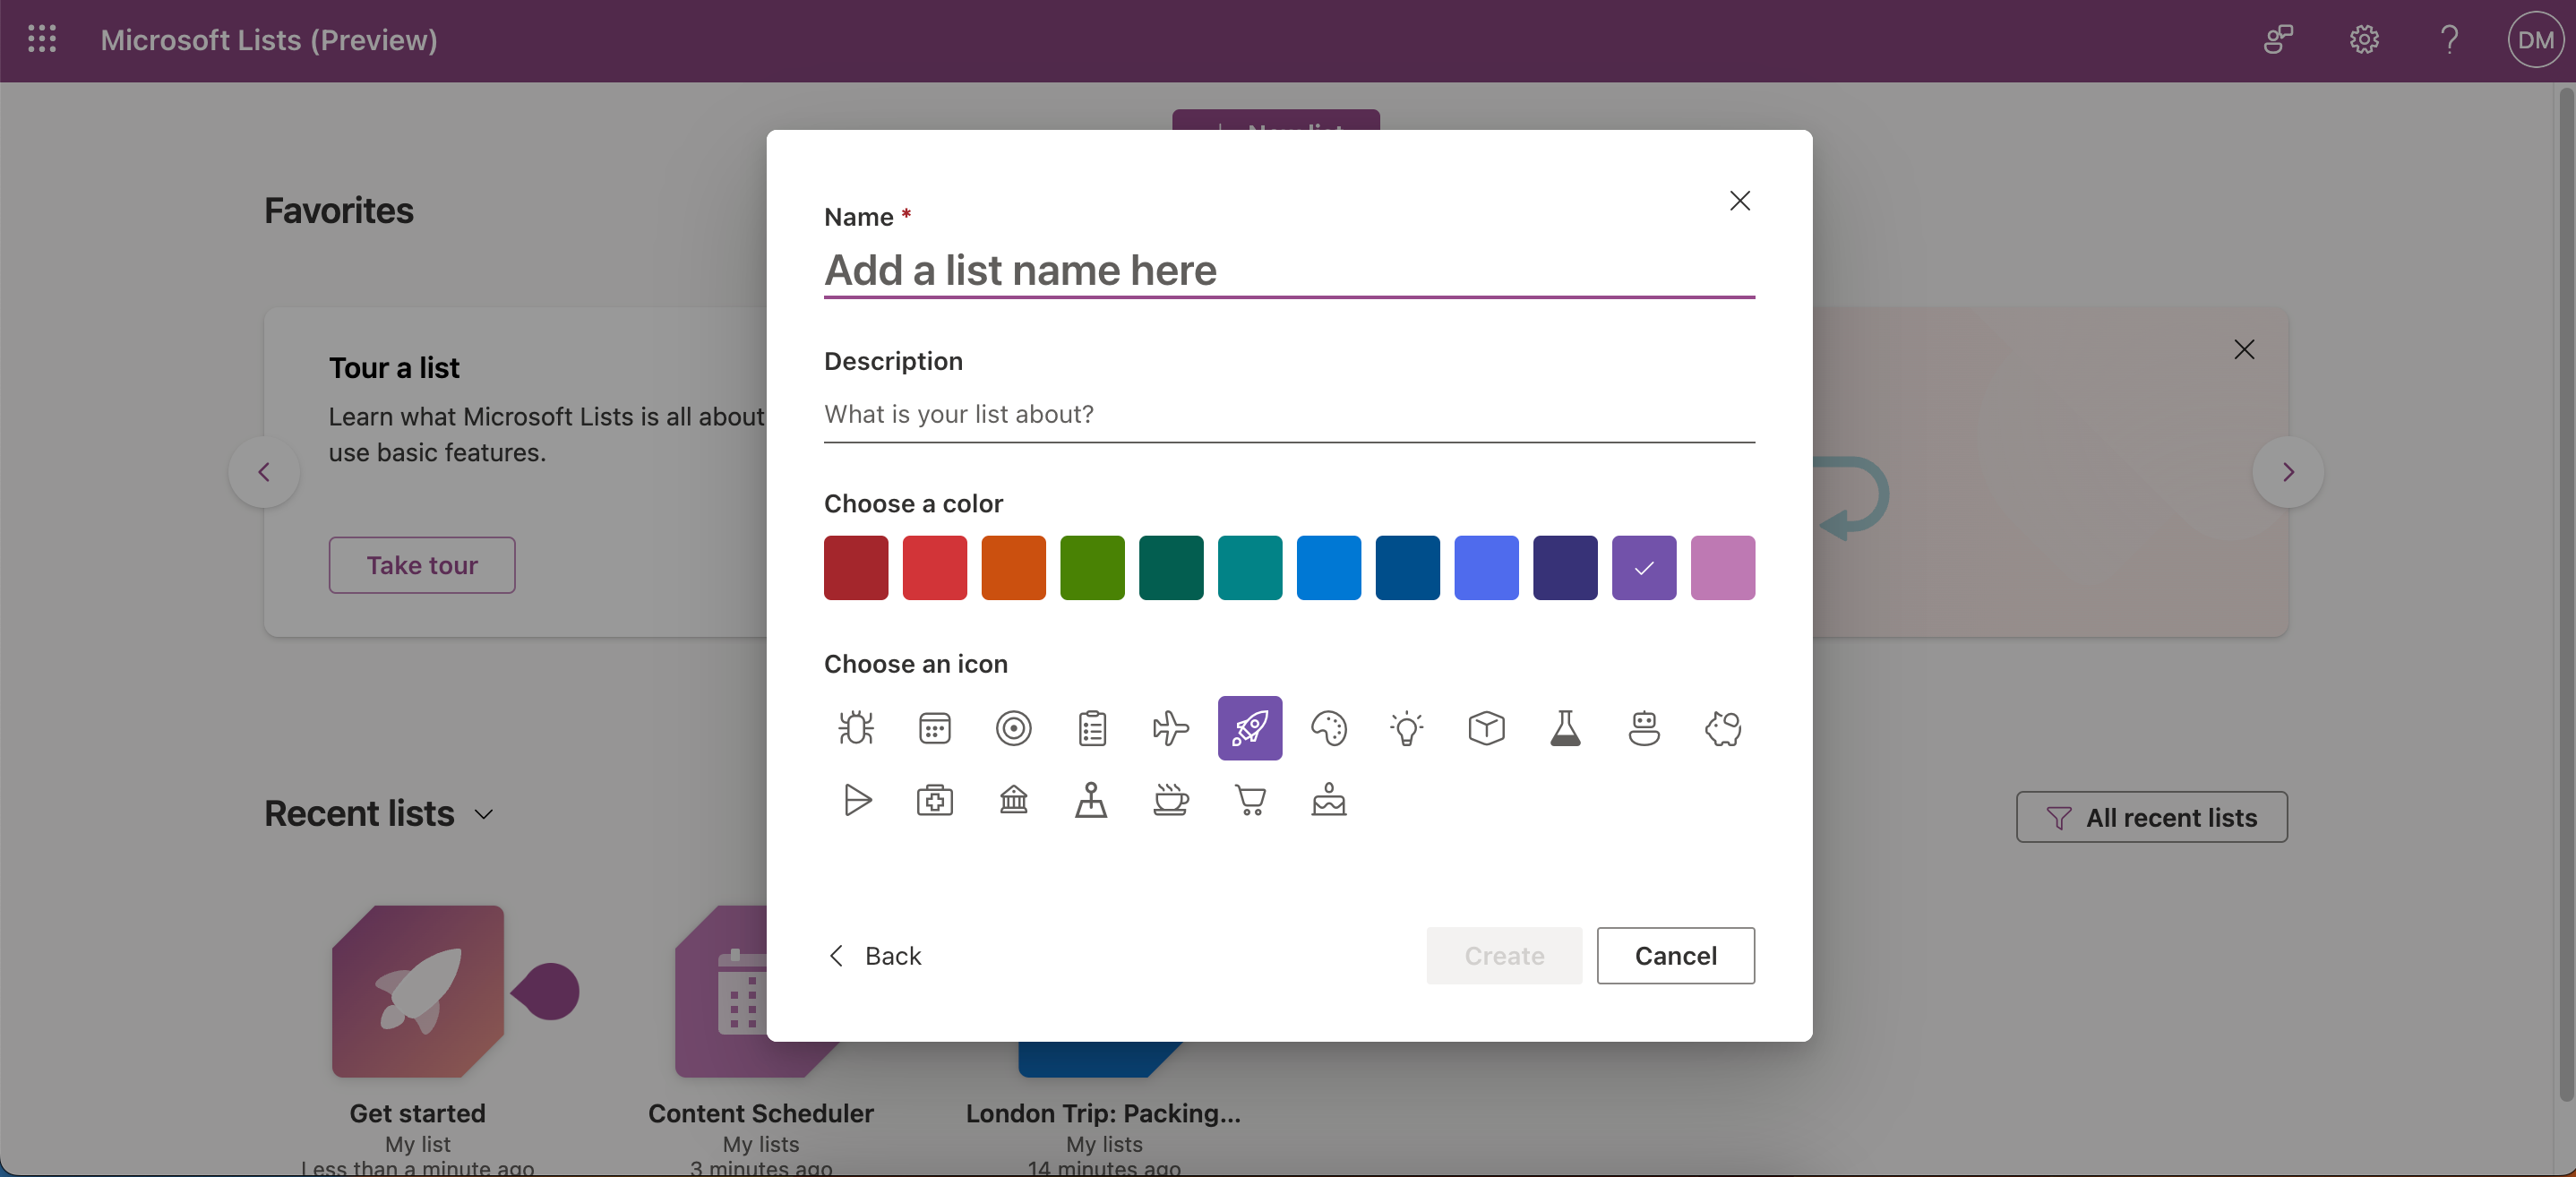 Customize Name and Icon in the Microsoft Lists App